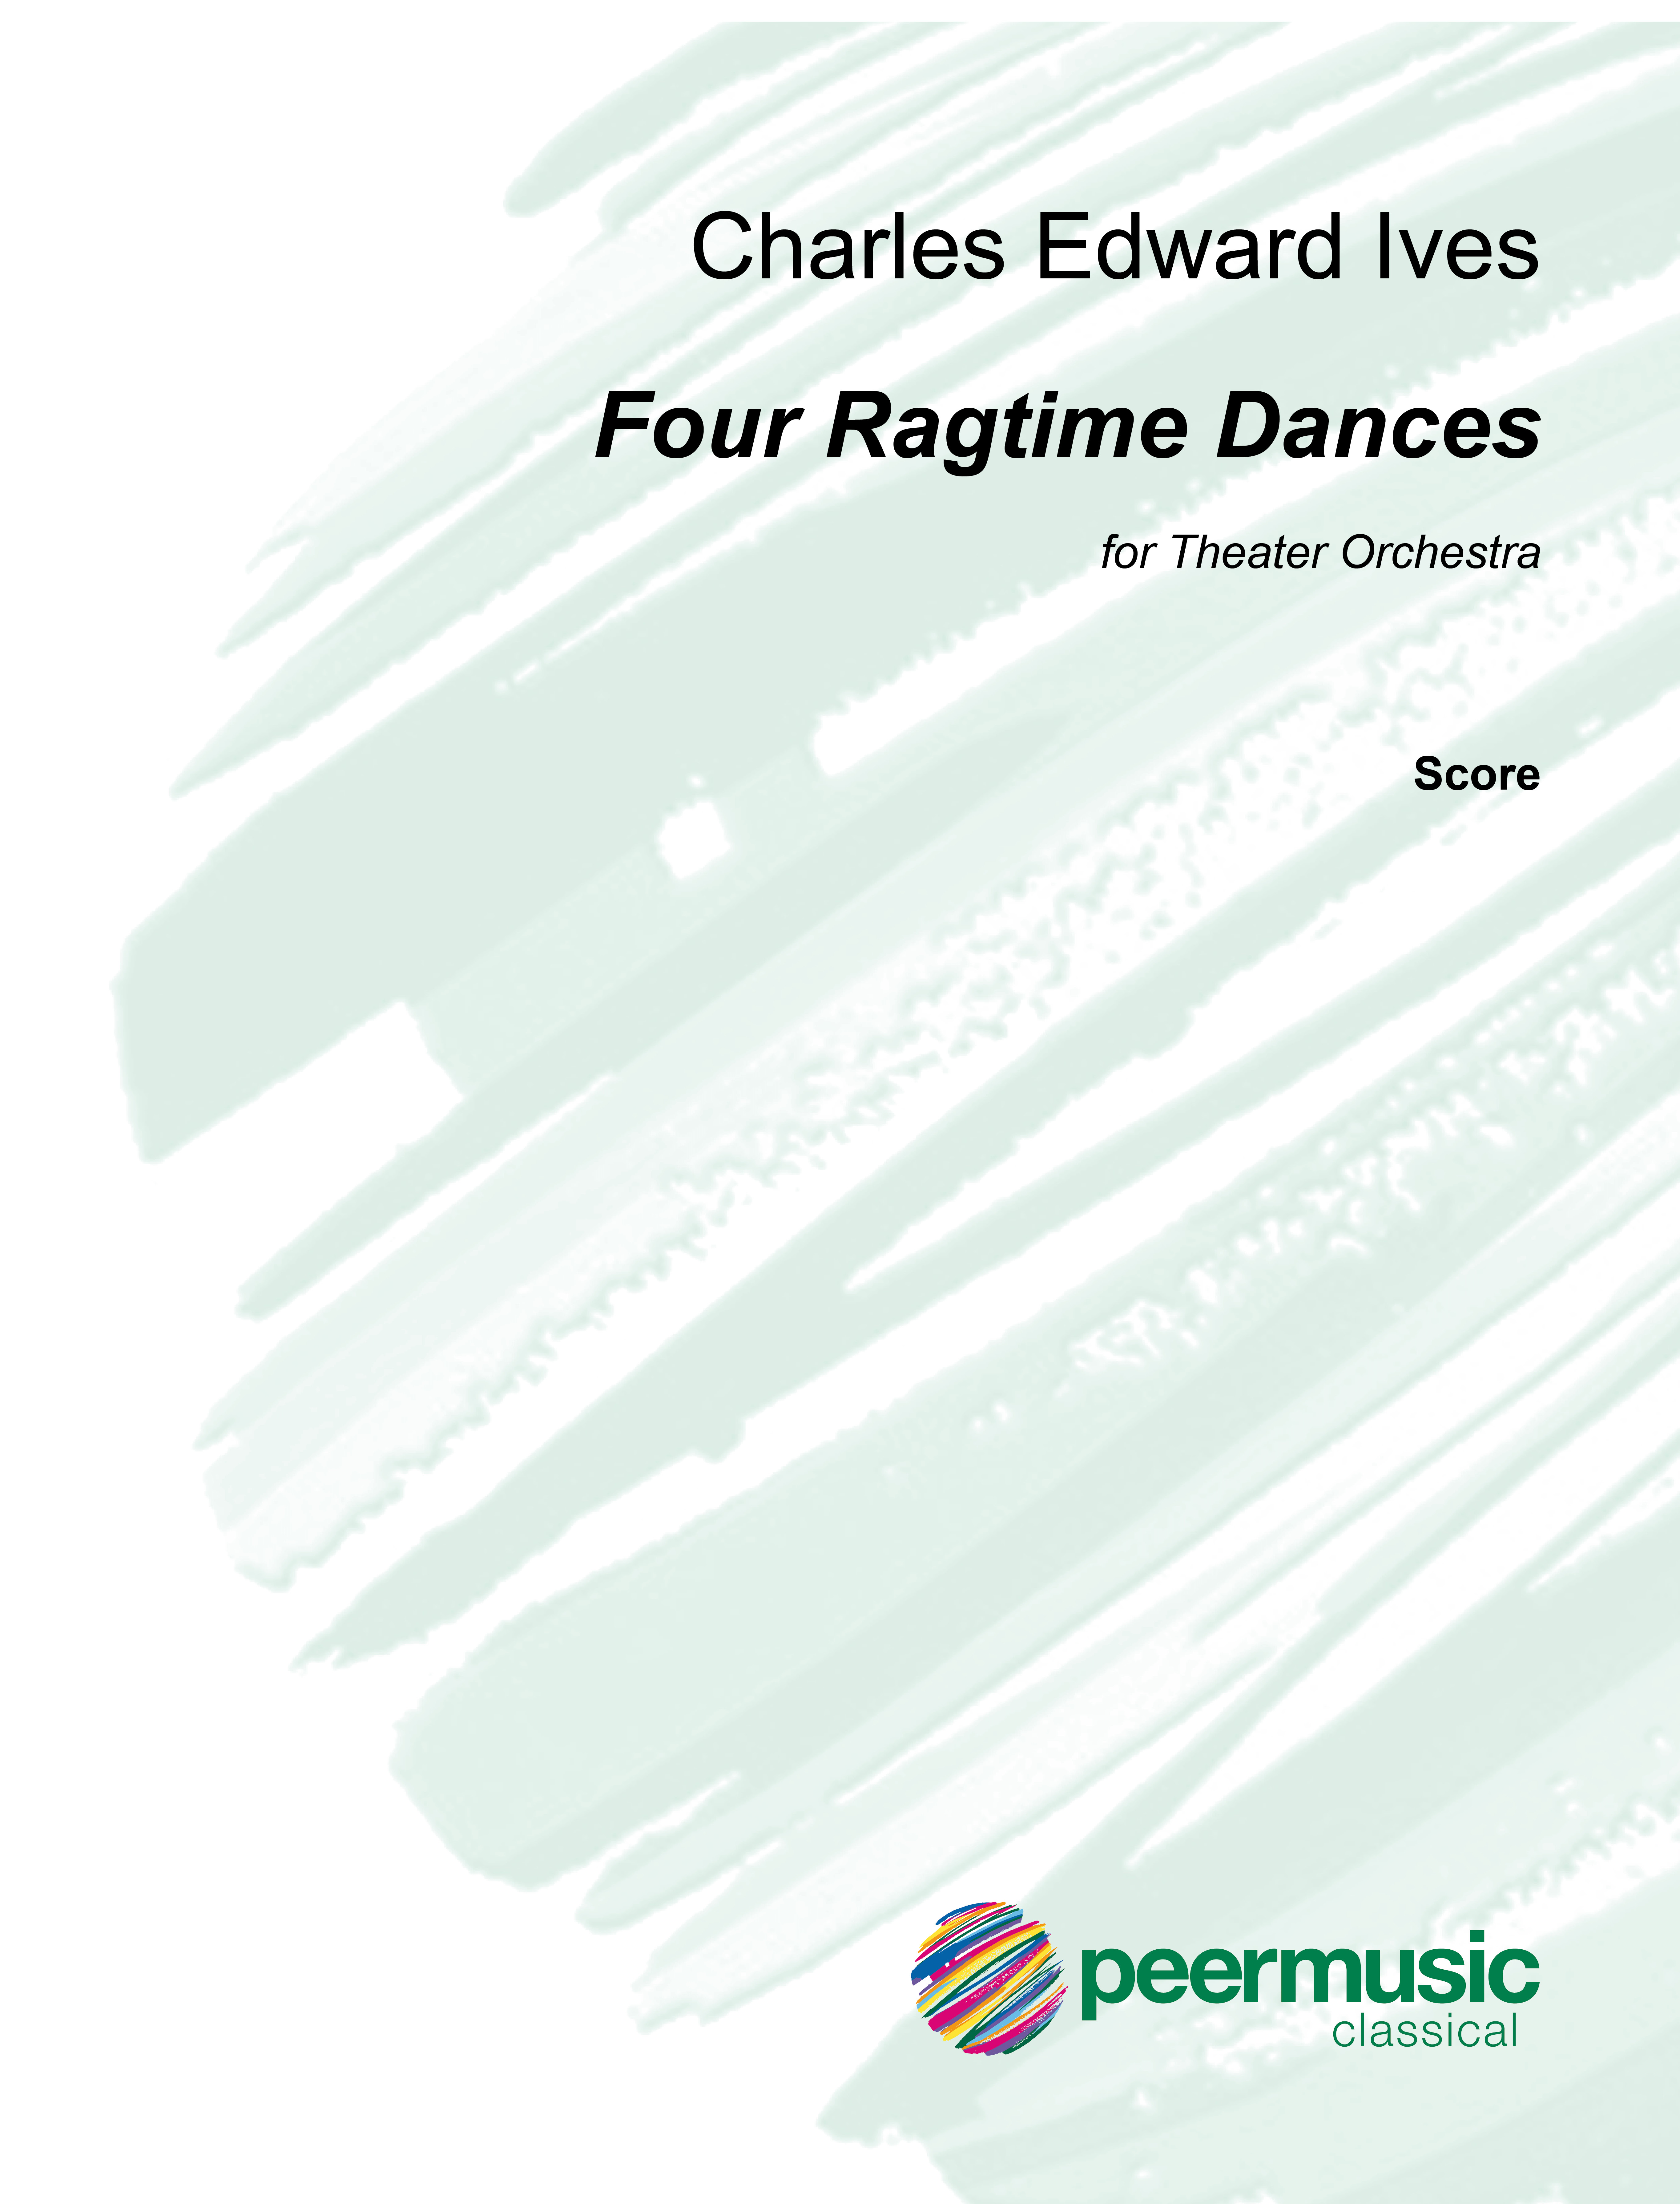 4 Ragtime Dances  for theater orchestra  score